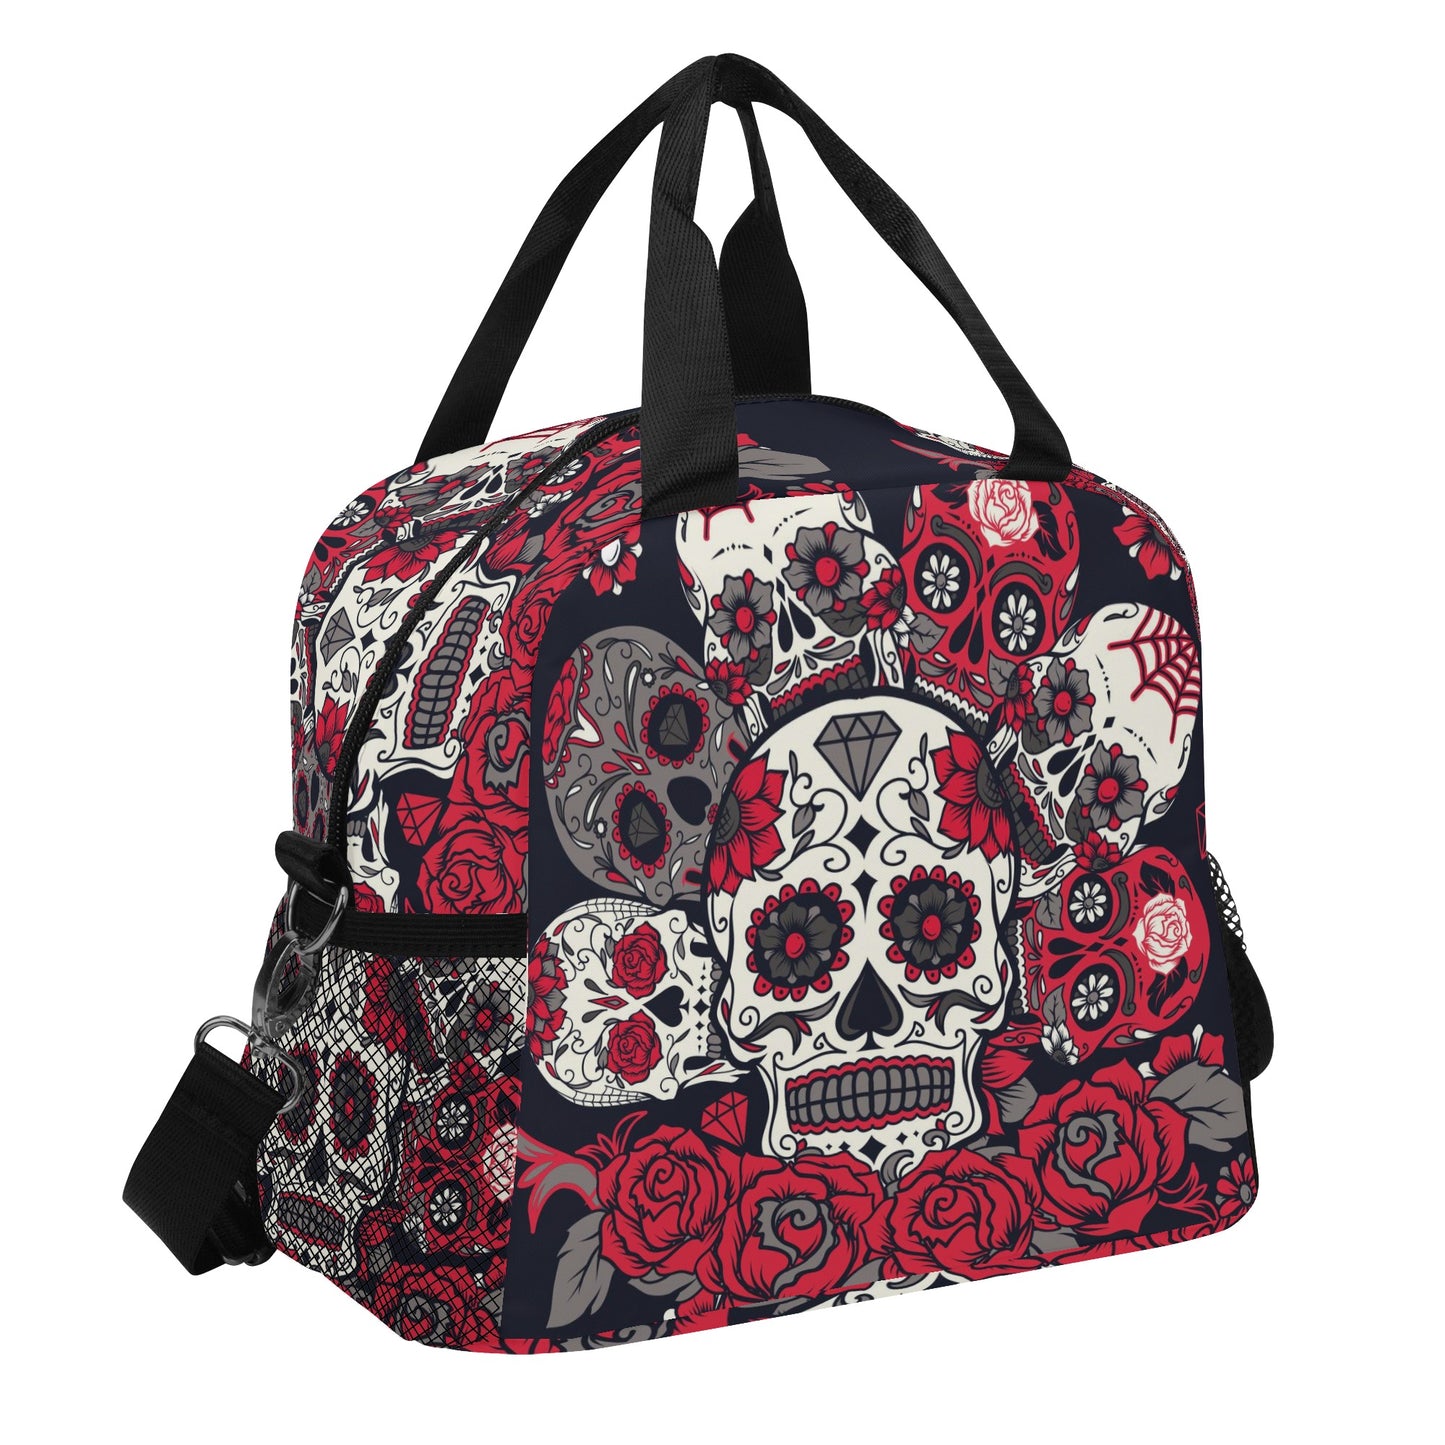 All Floral sugar skull pattern Over Printing Lunch Bag